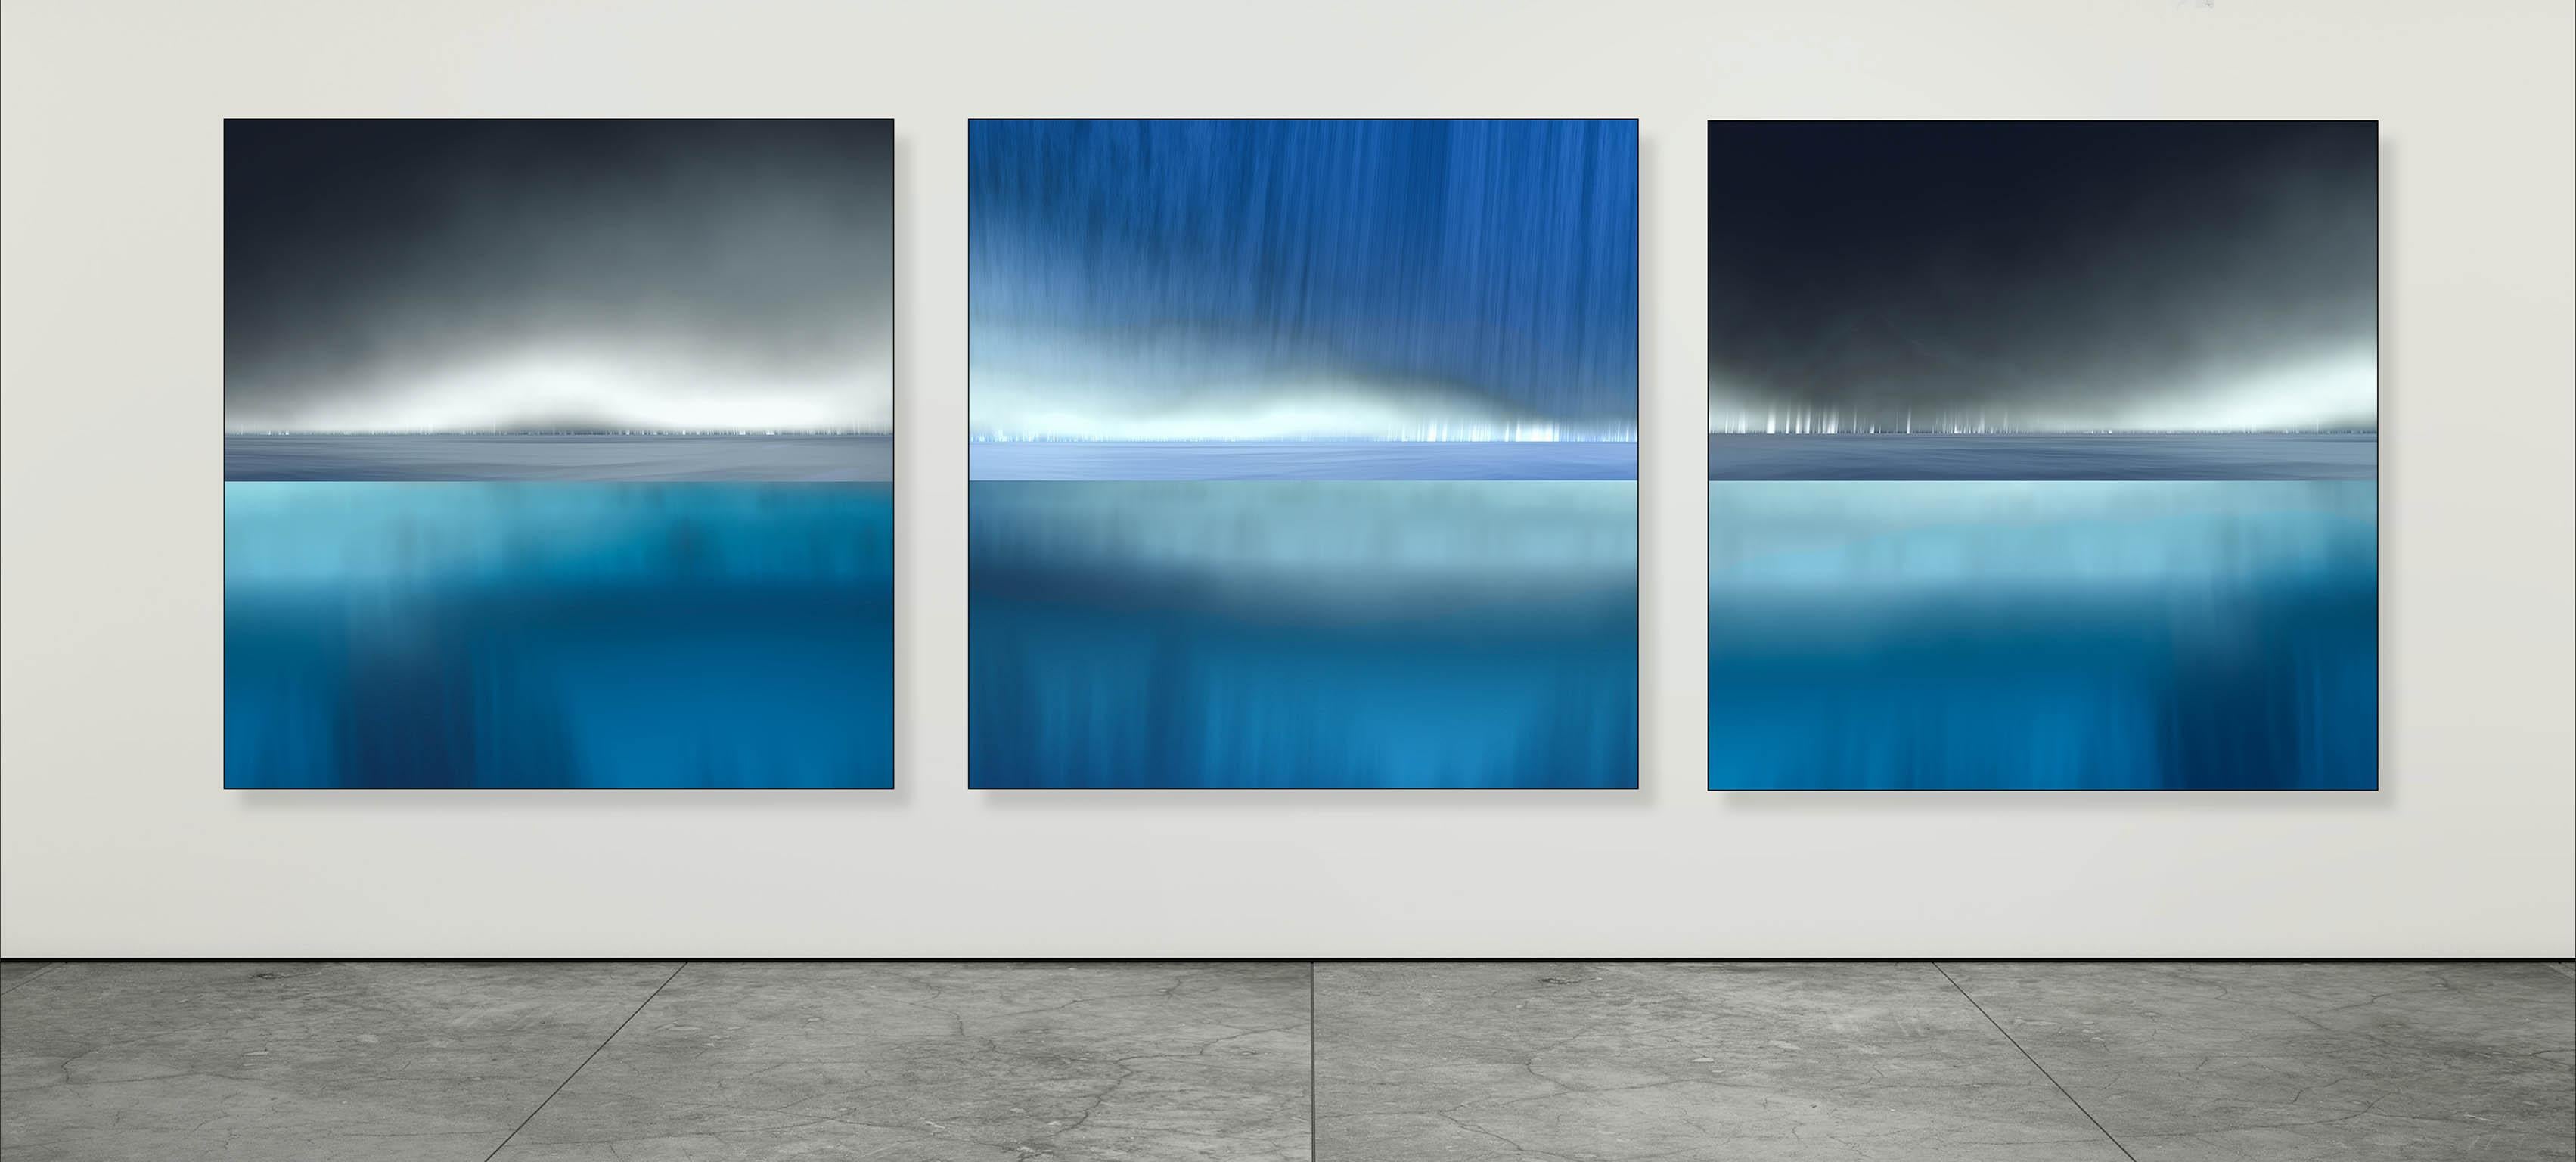 Paul-Émile Rioux Color Photograph - Triptych Turquoise - Underwater World in Nuances of Blue - Abstract Seascapes